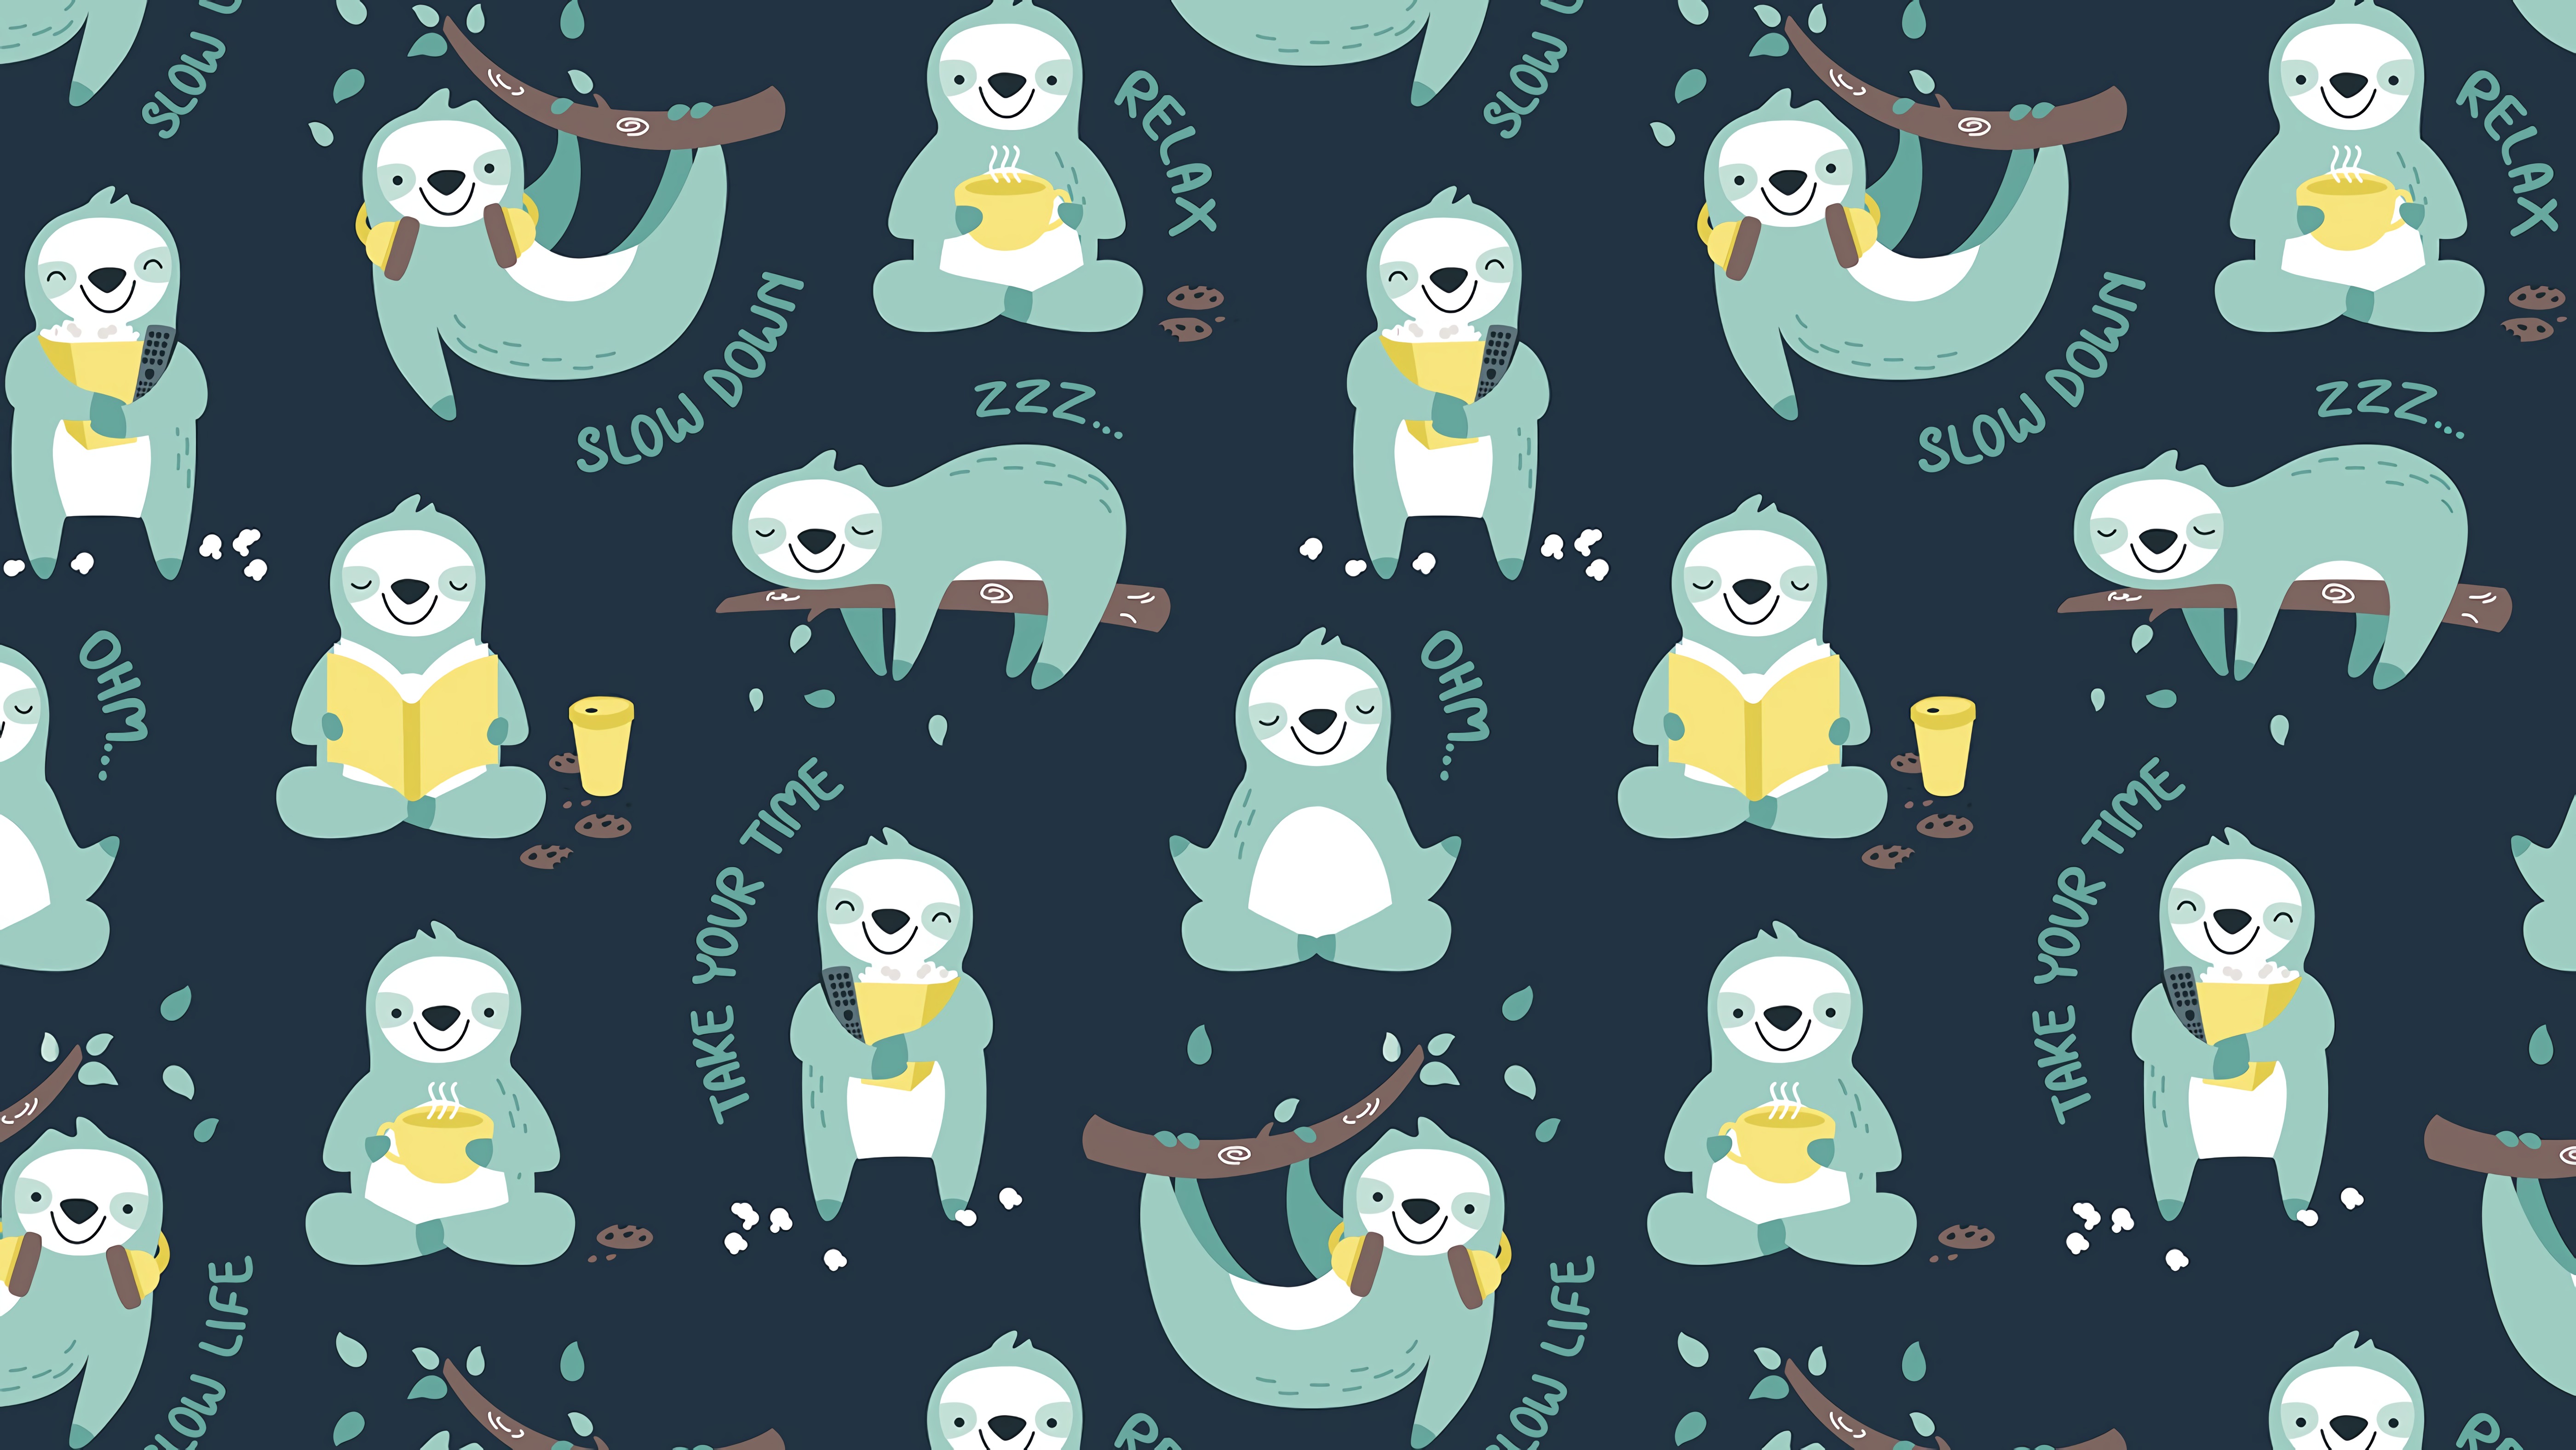 funny, art, pattern, texture, textures, relax, sloths cellphone